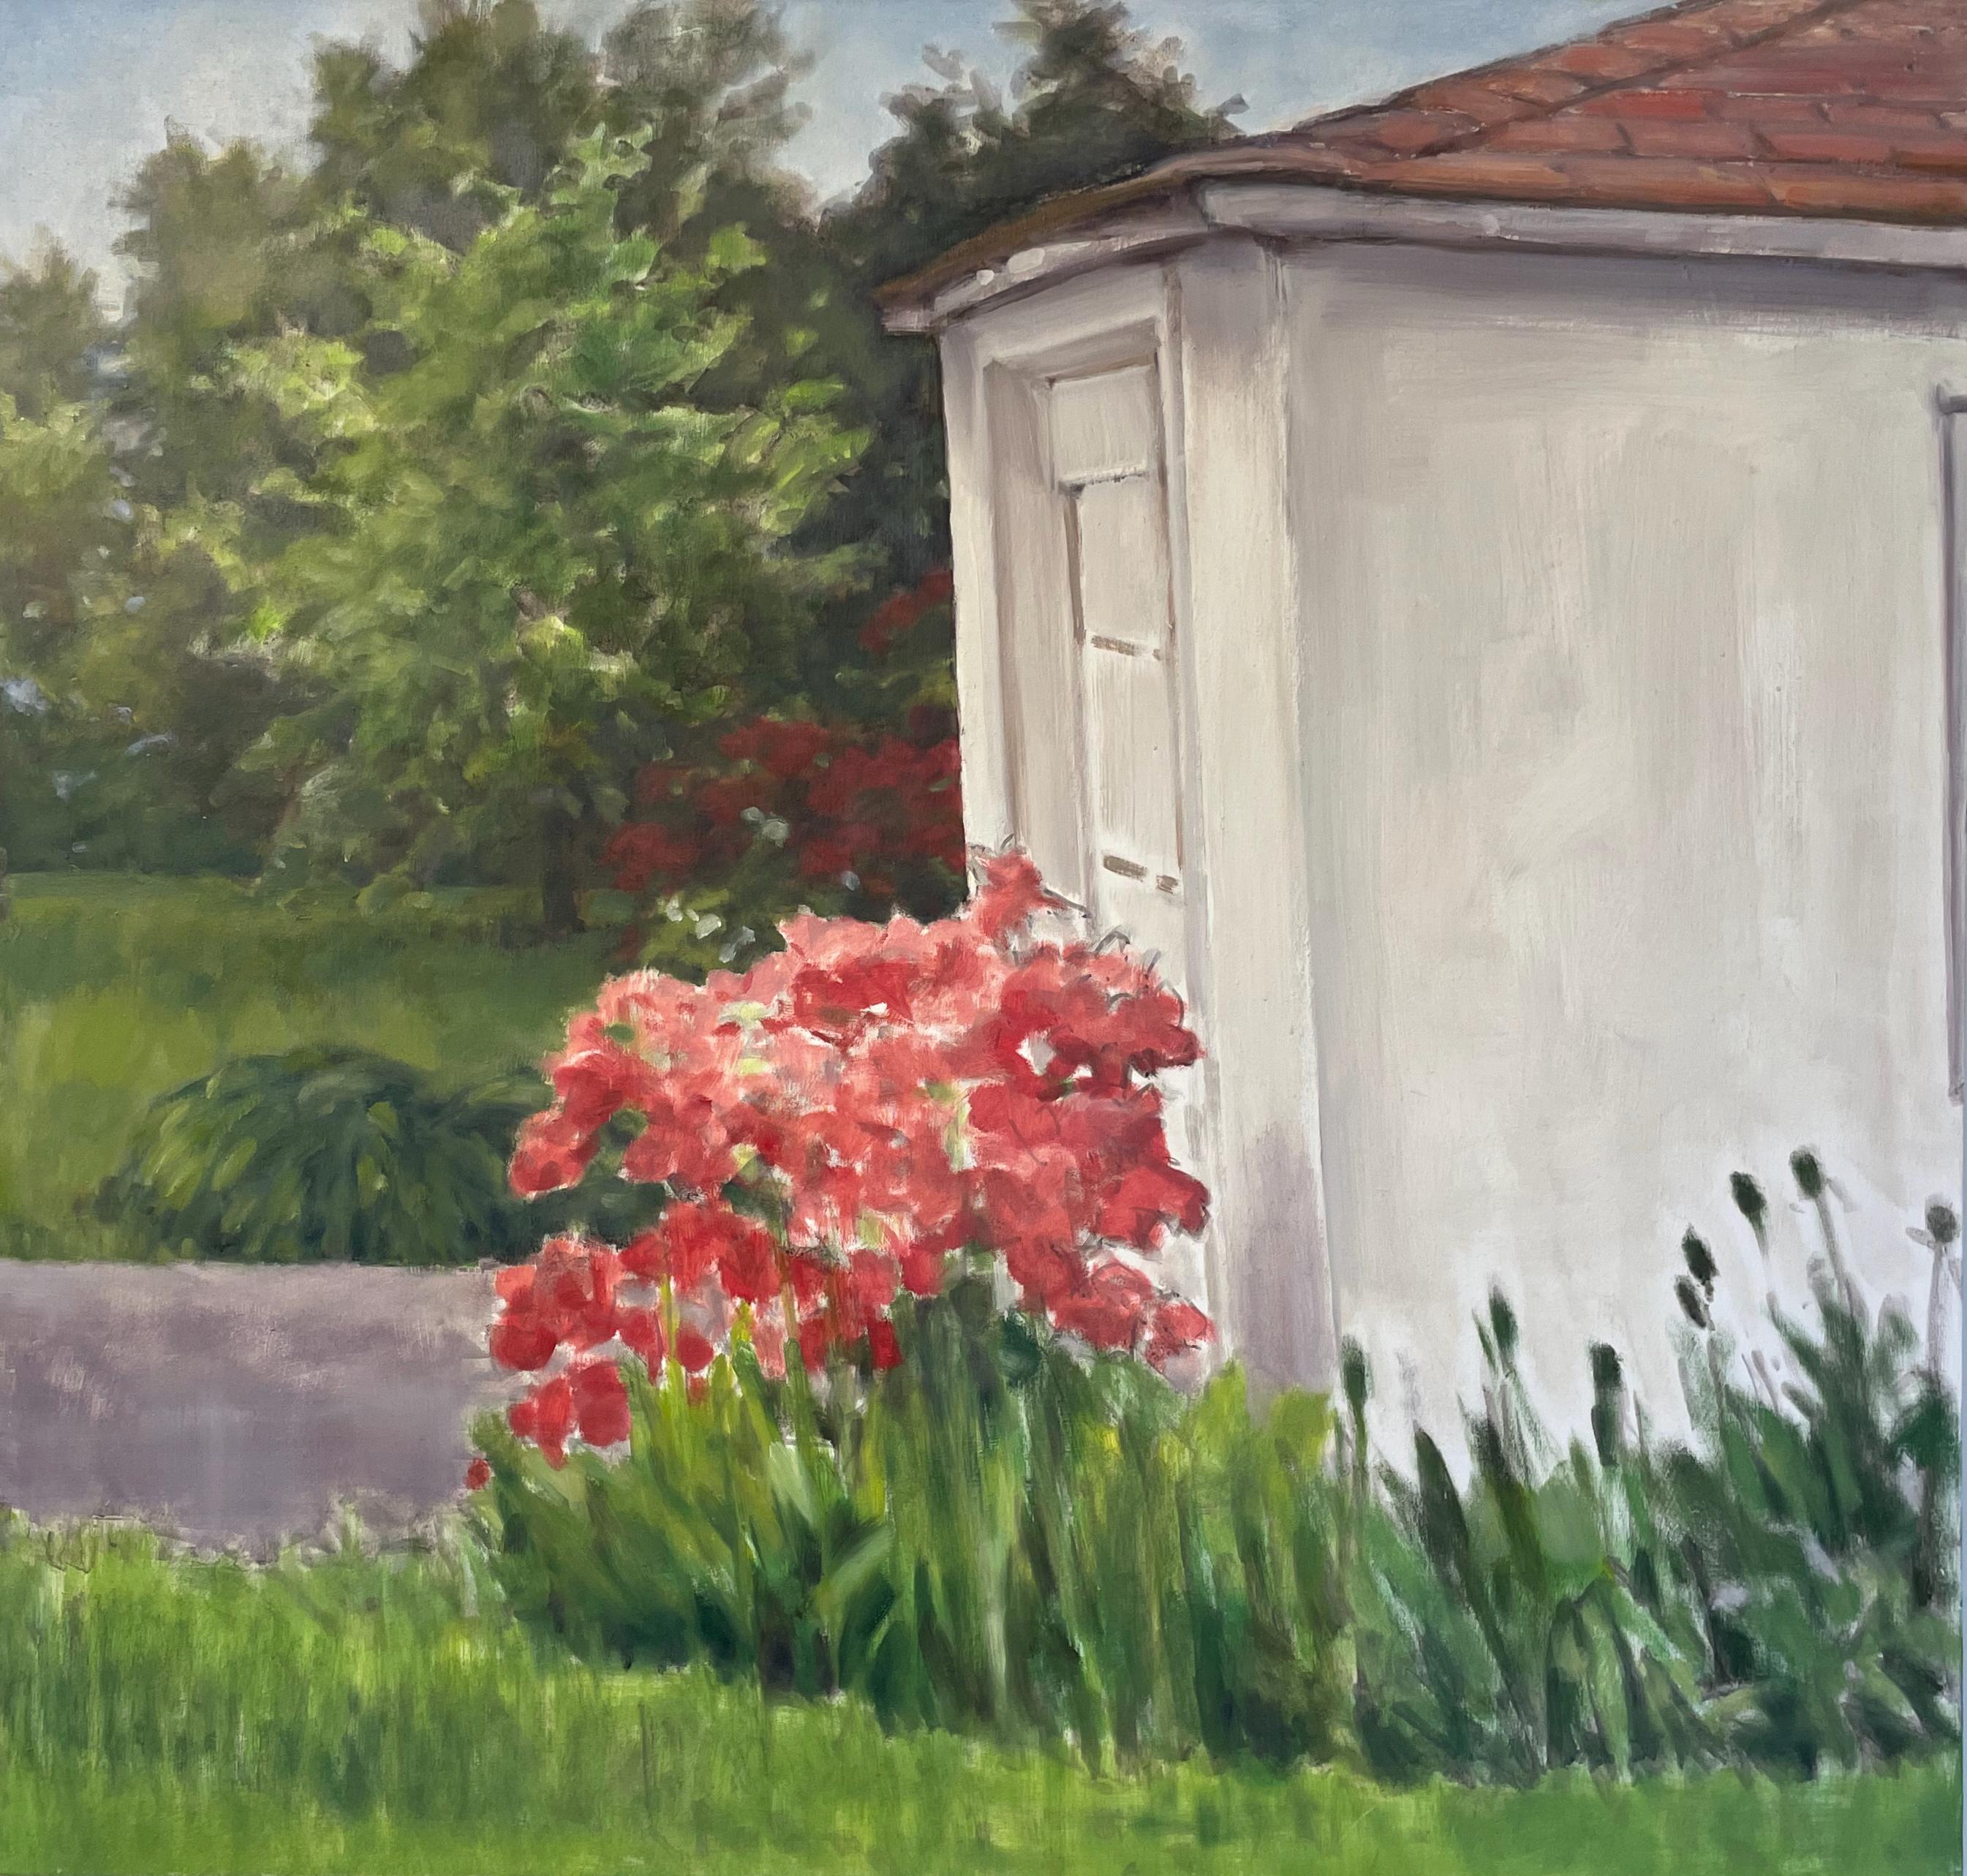 Daisy Craddock Still-Life Painting - Azalea by a Garage Door, 2010, oil on canvas, floral outdoor painting